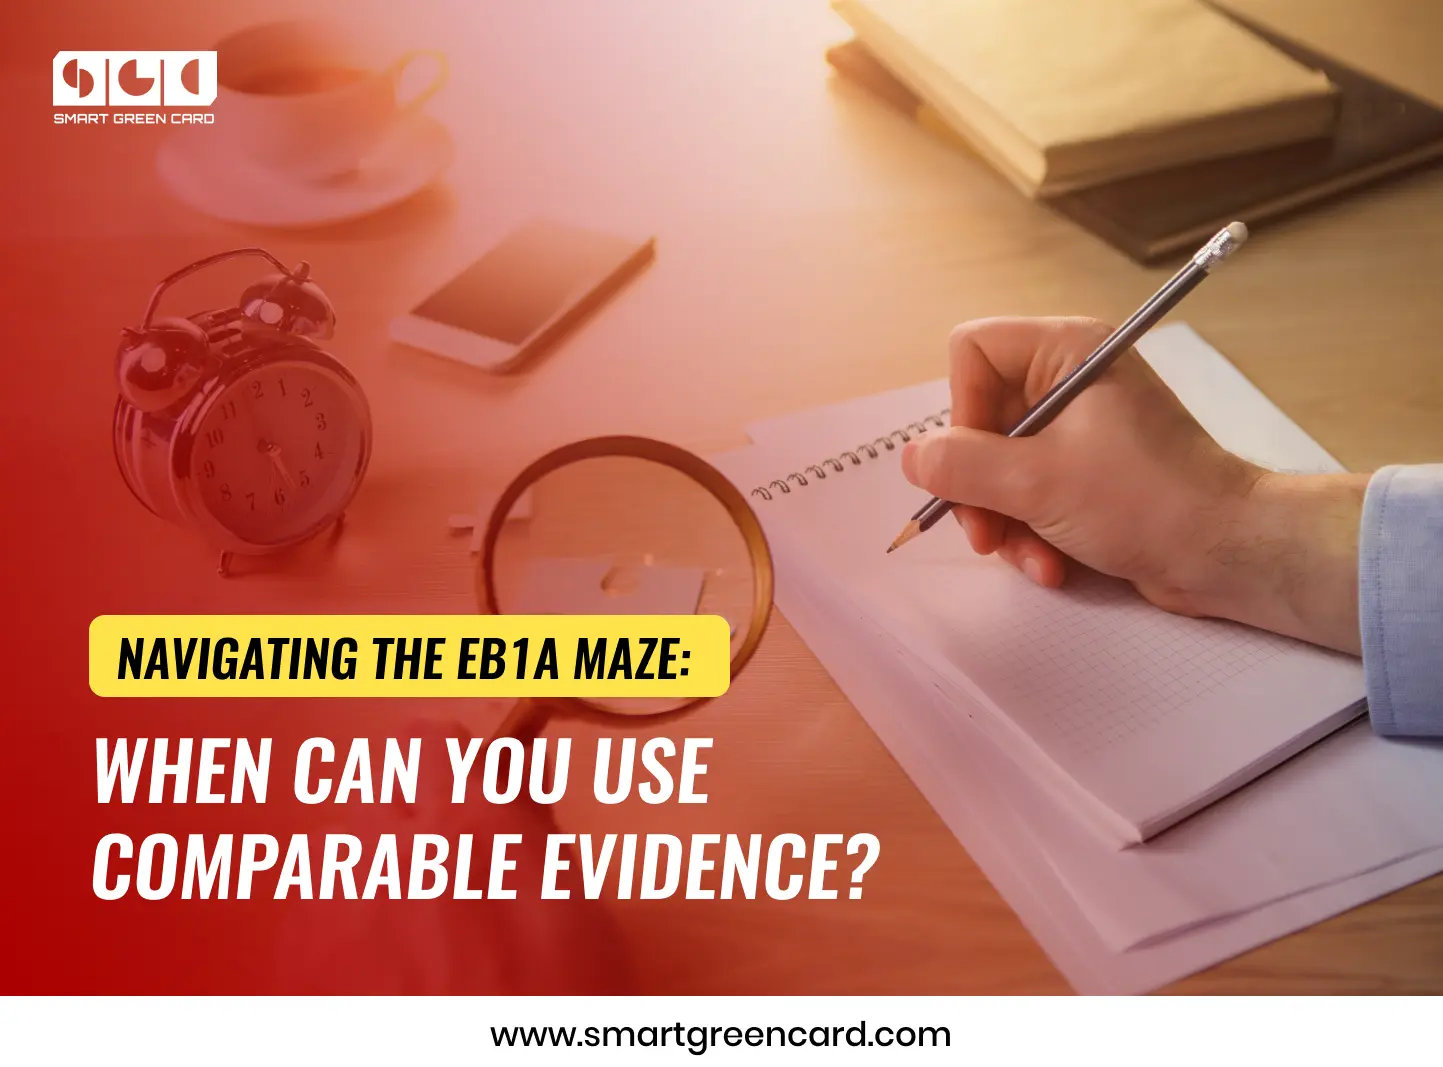 When Can You Use Comparable Evidence for EB1A?